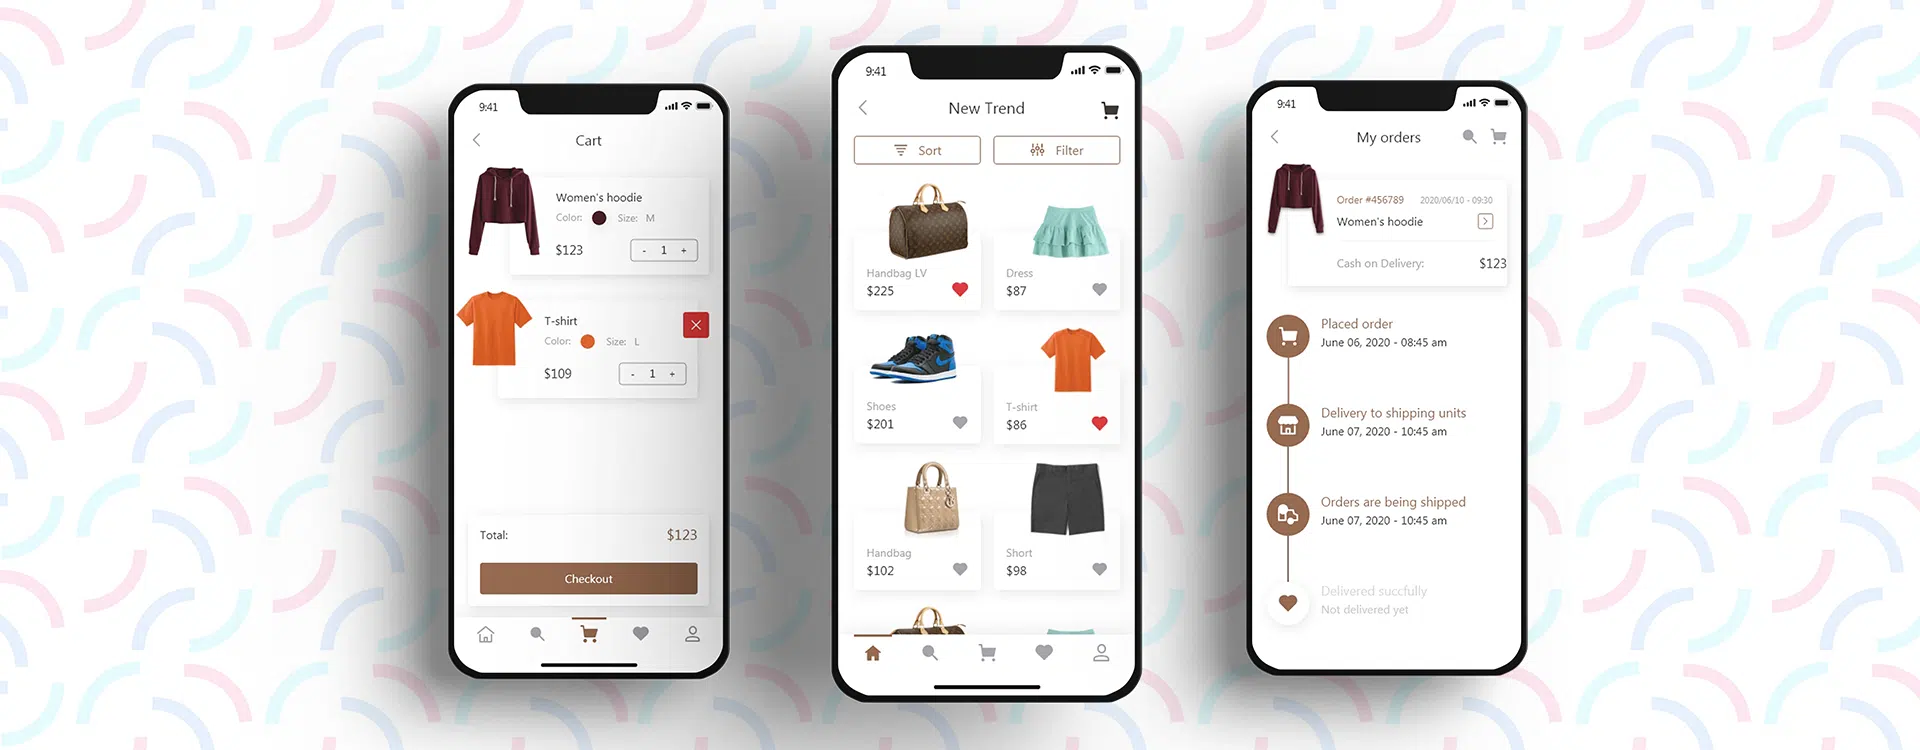 Data Science & ML-powered eCommerce app interface: Sleek design, categories, search bar & personalized recommendations for smart online shopping